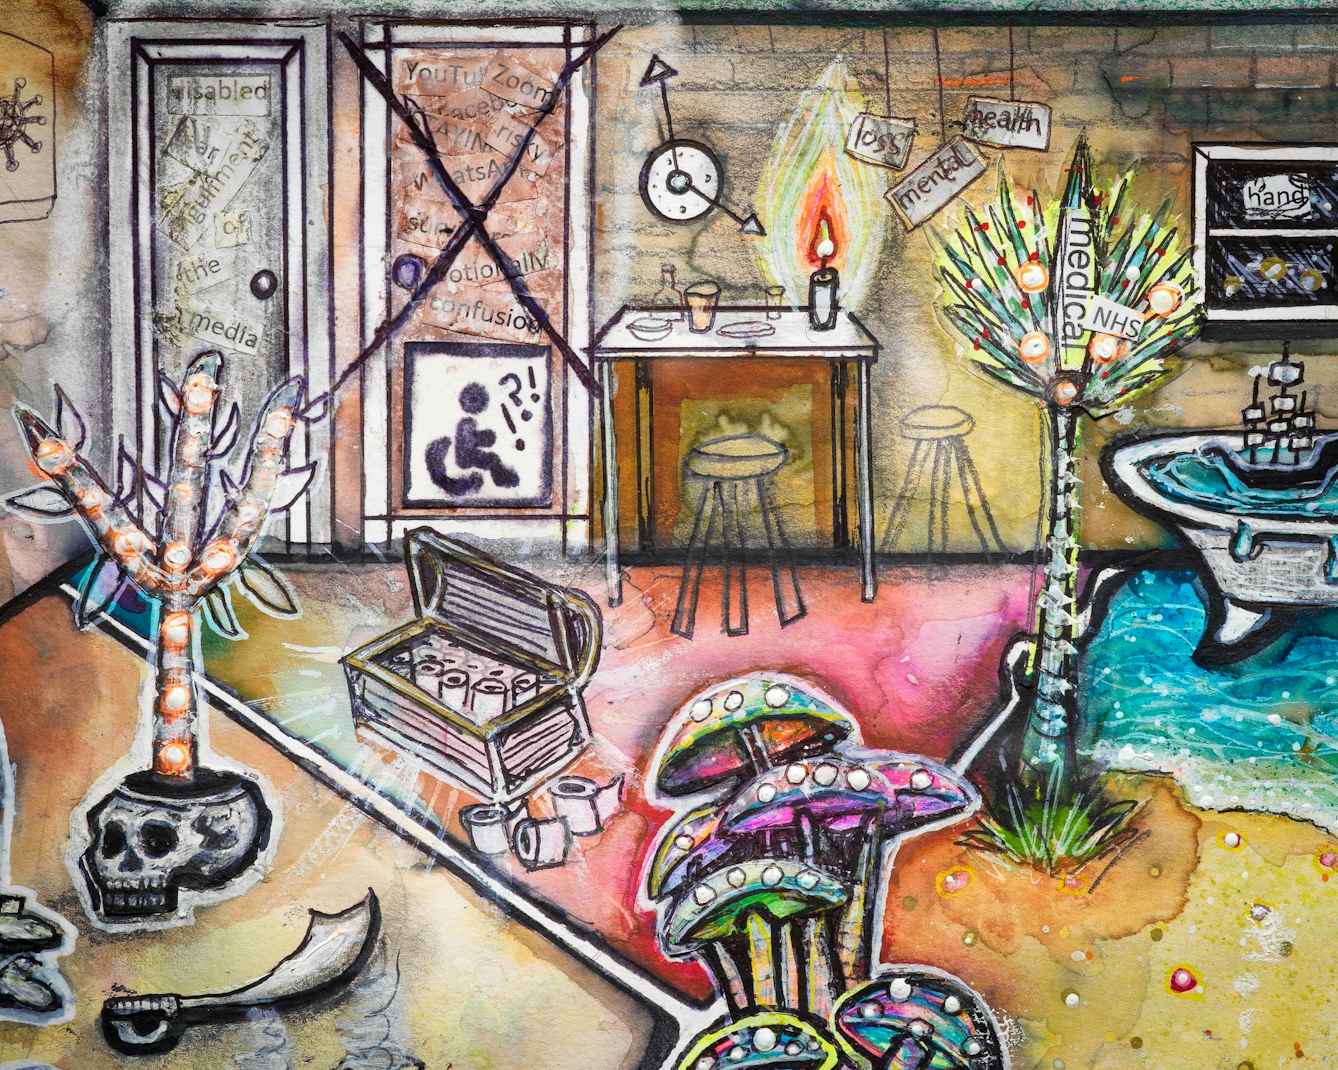 Artwork using watercolour and ink incorporating collaged words throughout the scene. The artwork shows a busy multi-coloured household room. In the background, The image contains elements such as: a treasure chest filled with toilet rolls; a wall clock with oversized hands; a doorway with a large cross drawn through it on which there is a disabled symbol of a wheelchair; and a small rocket with the words ‘medical’ and ‘NHS’ taking off out of a palm tree. In the foreground there is a cluster of colourful mushrooms, and to the side of that a cutlass lying on the floor, as well as a small colourful tree growing out of a skull.